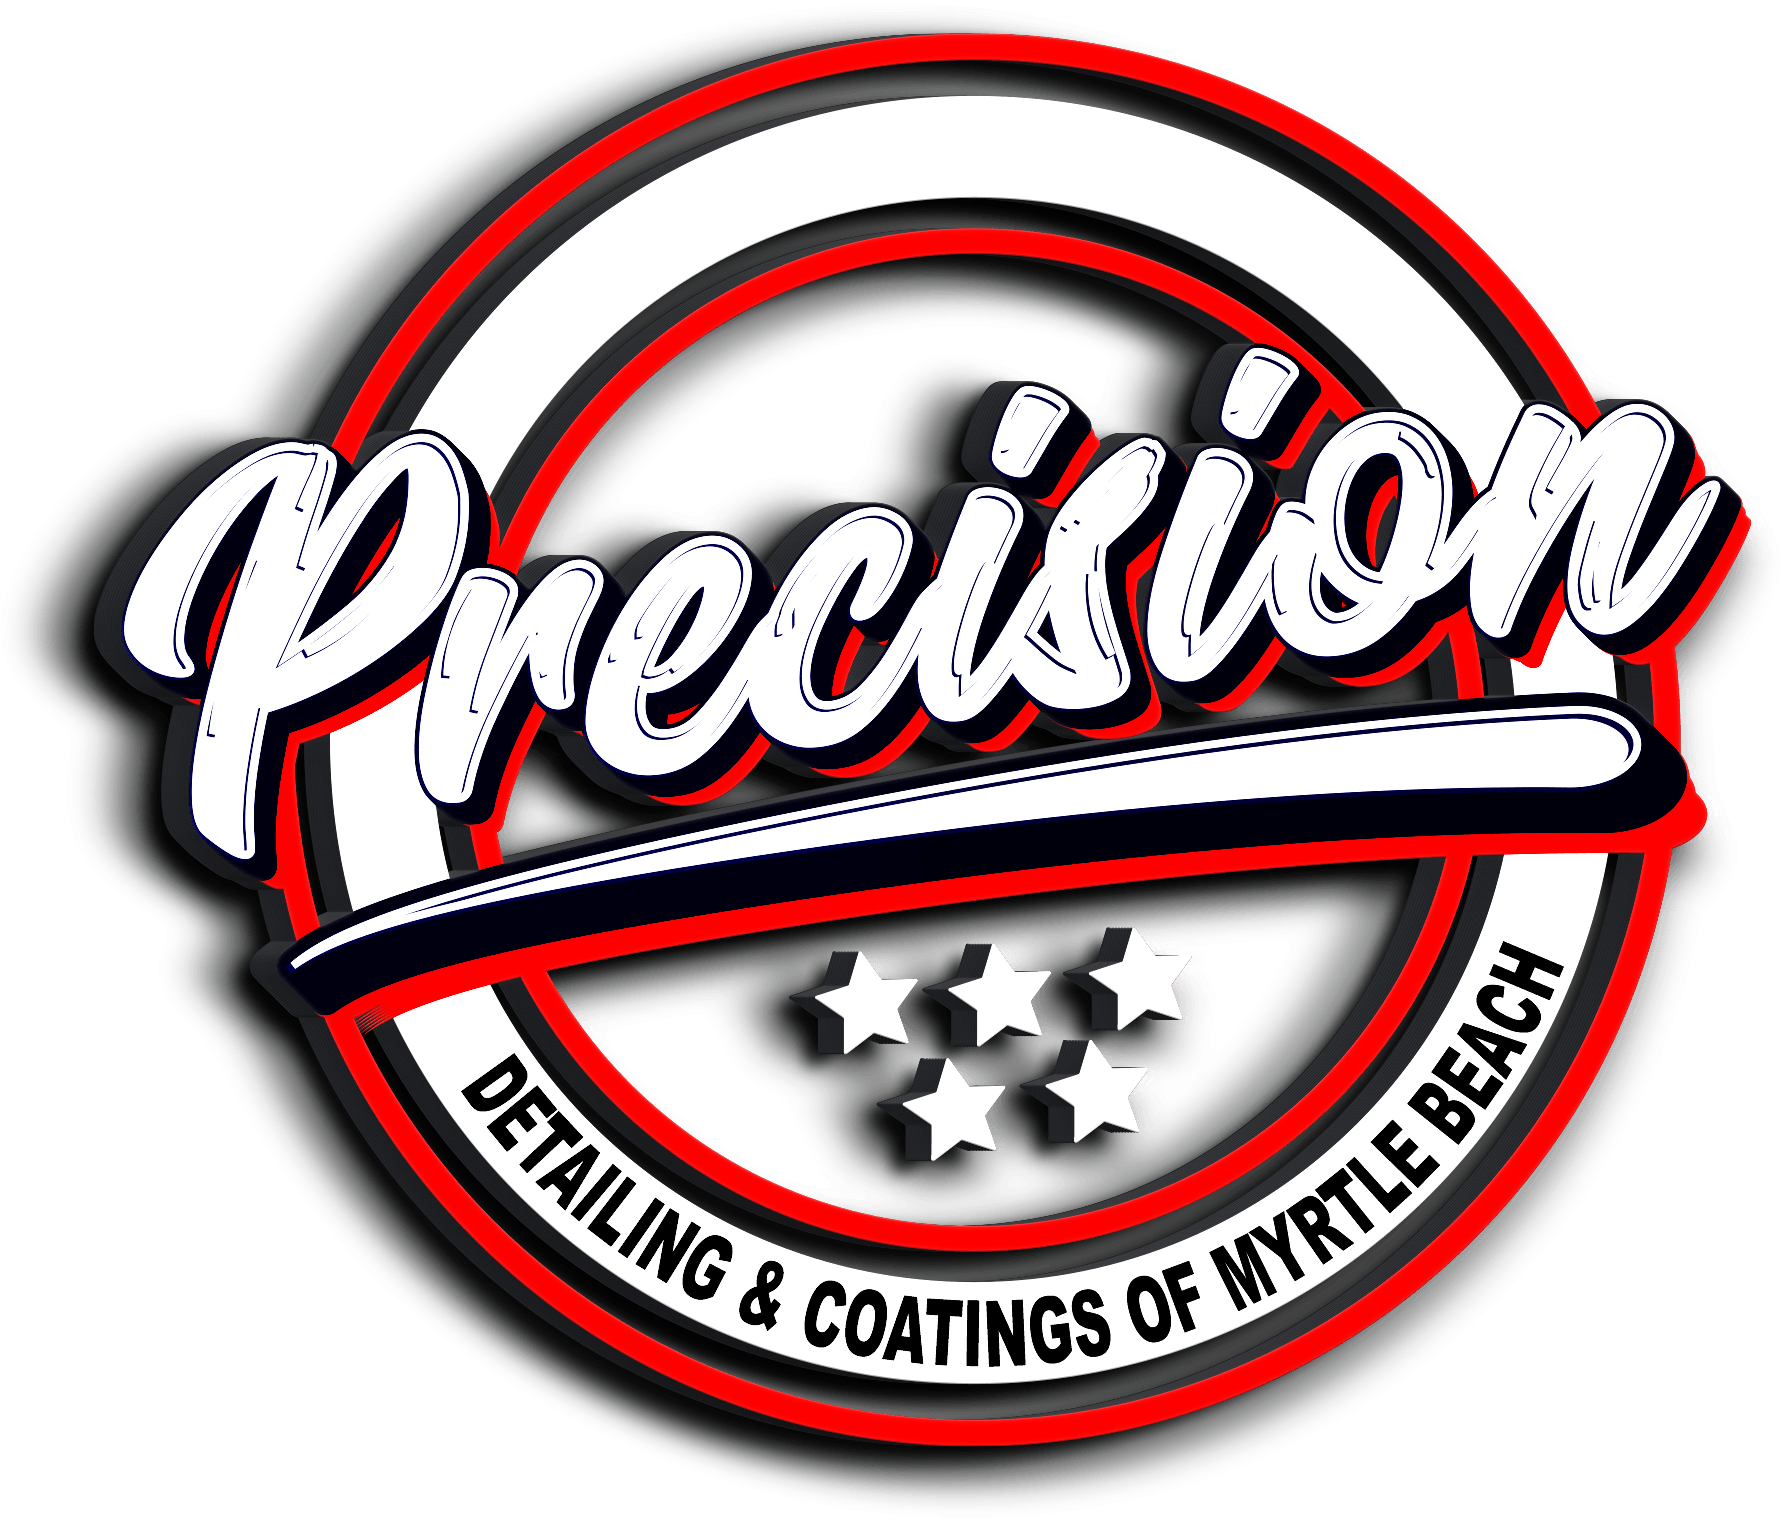 Precision Detailing & Coatings of Myrtle Beach